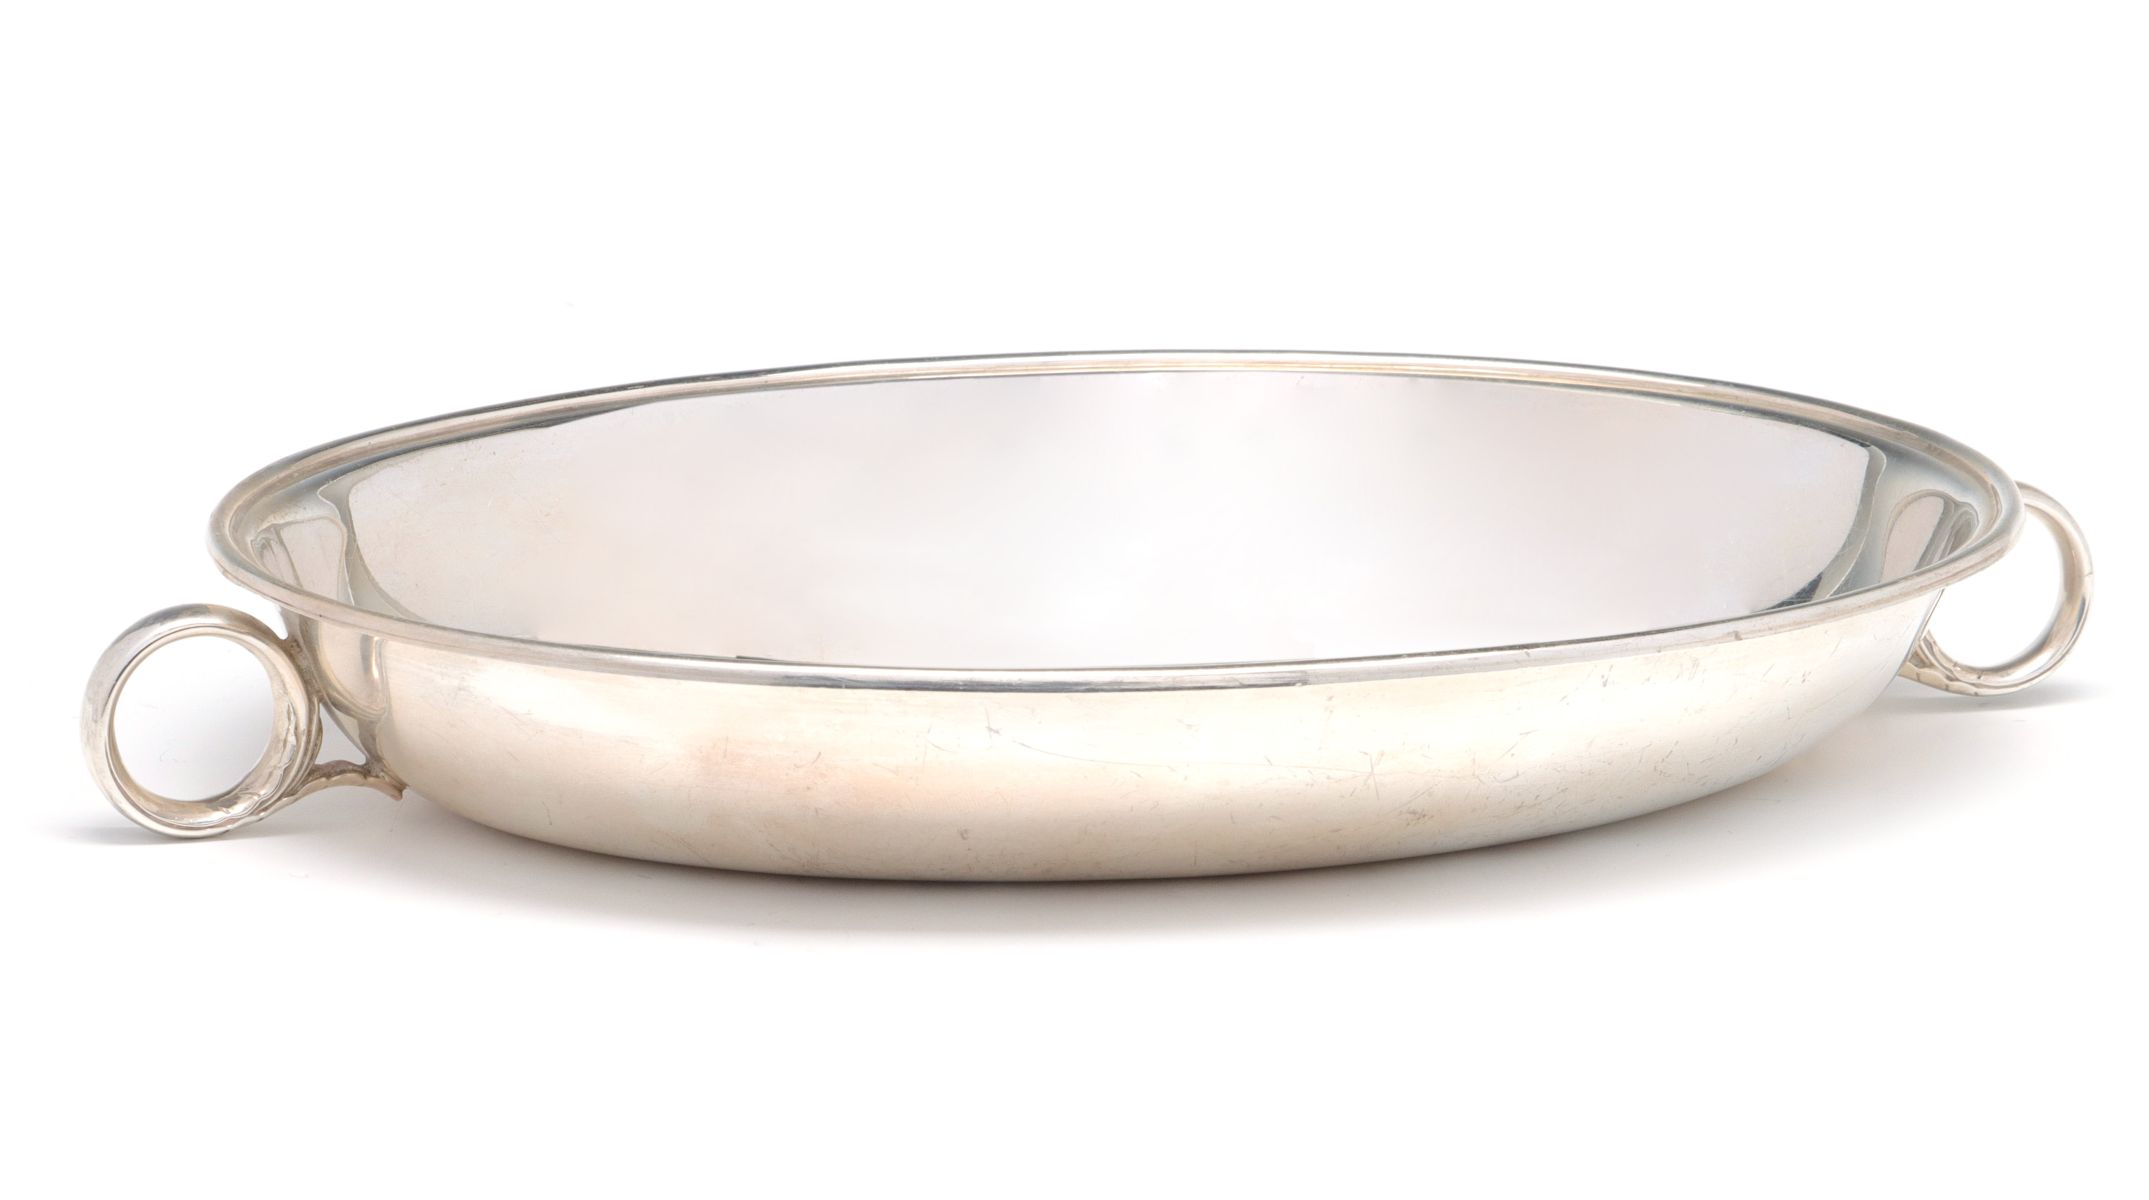 A 20TH C. OVAL STERLING SILVER OPEN DISH